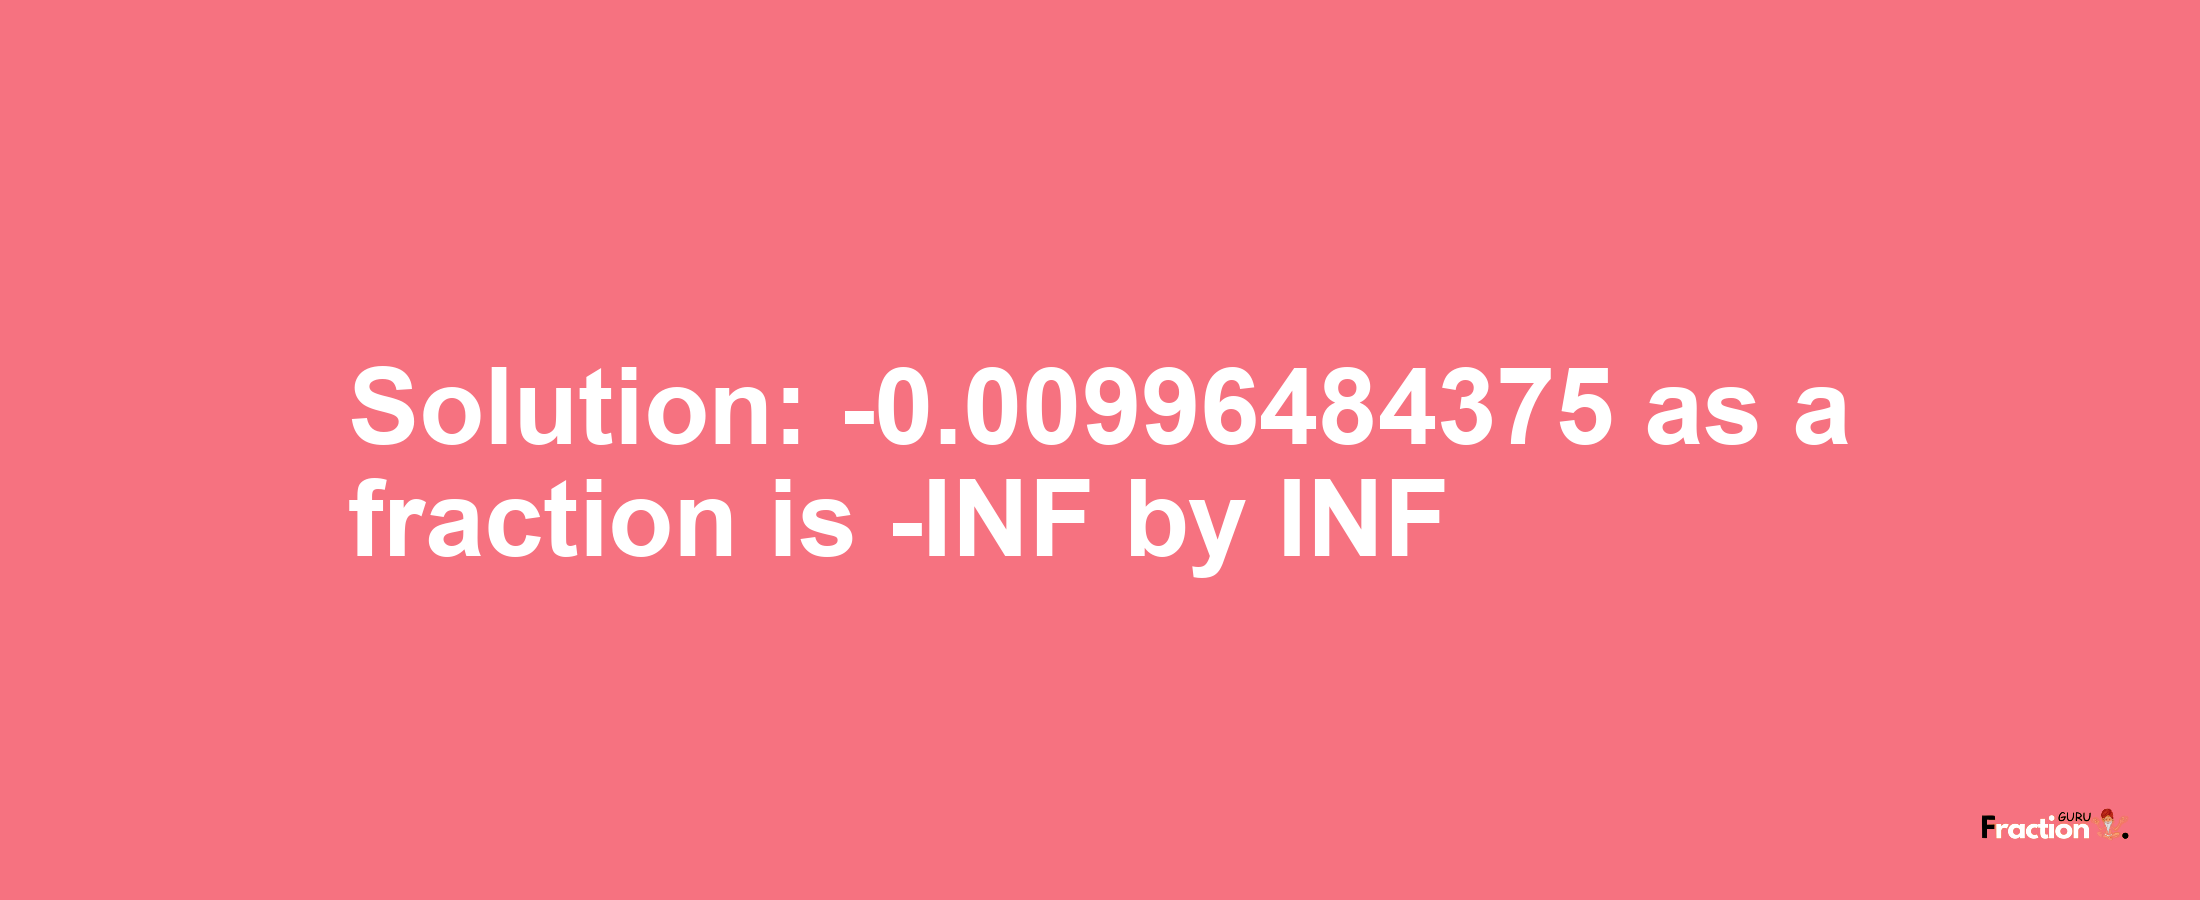 Solution:-0.00996484375 as a fraction is -INF/INF